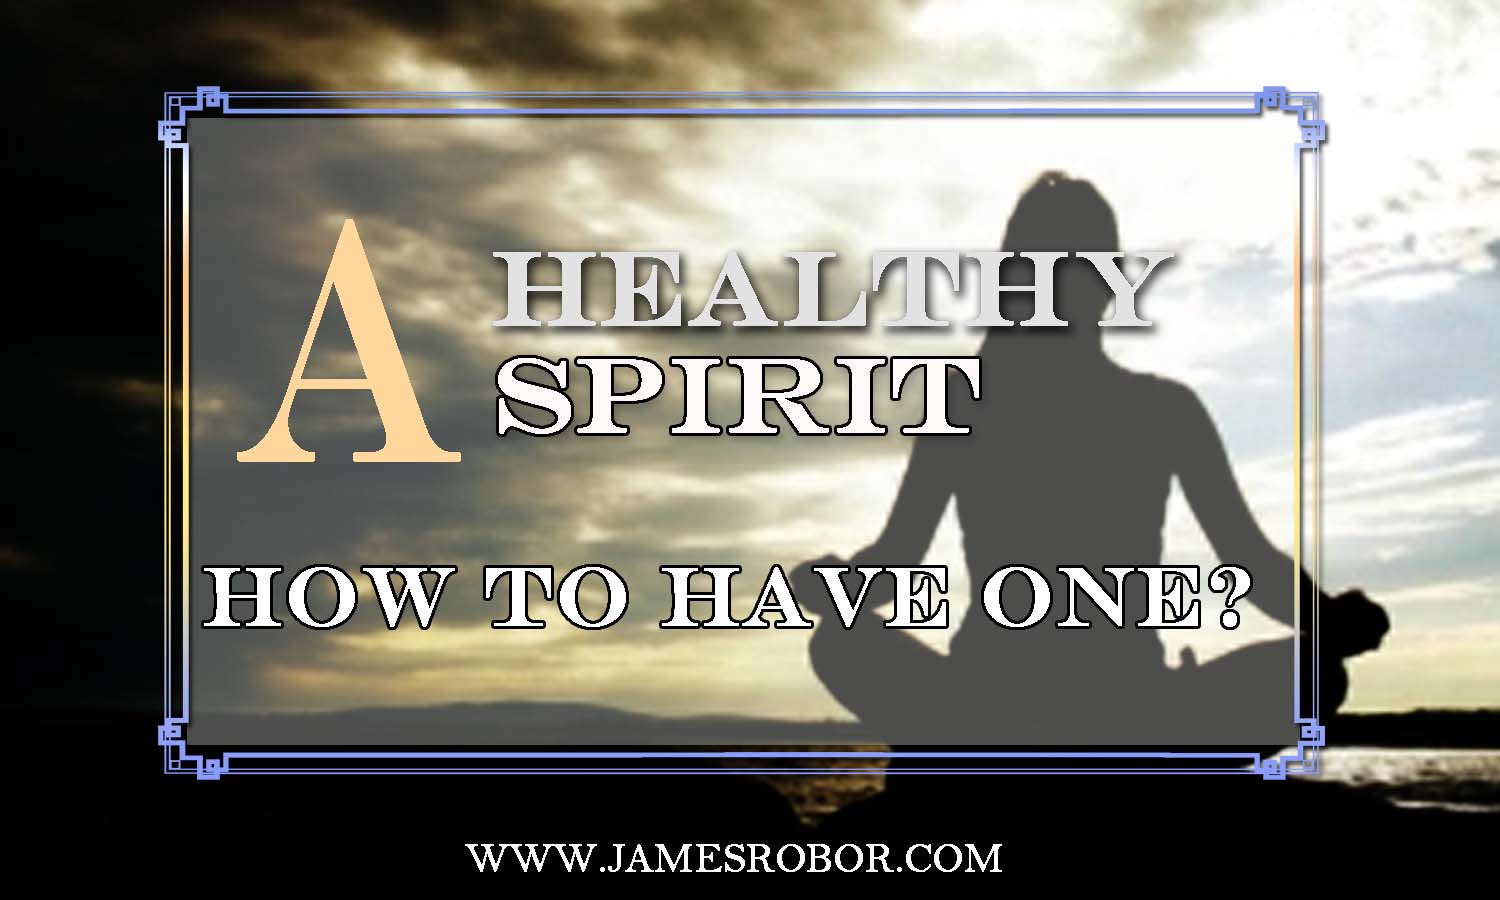 A Healthy Spirit: How To Have One?